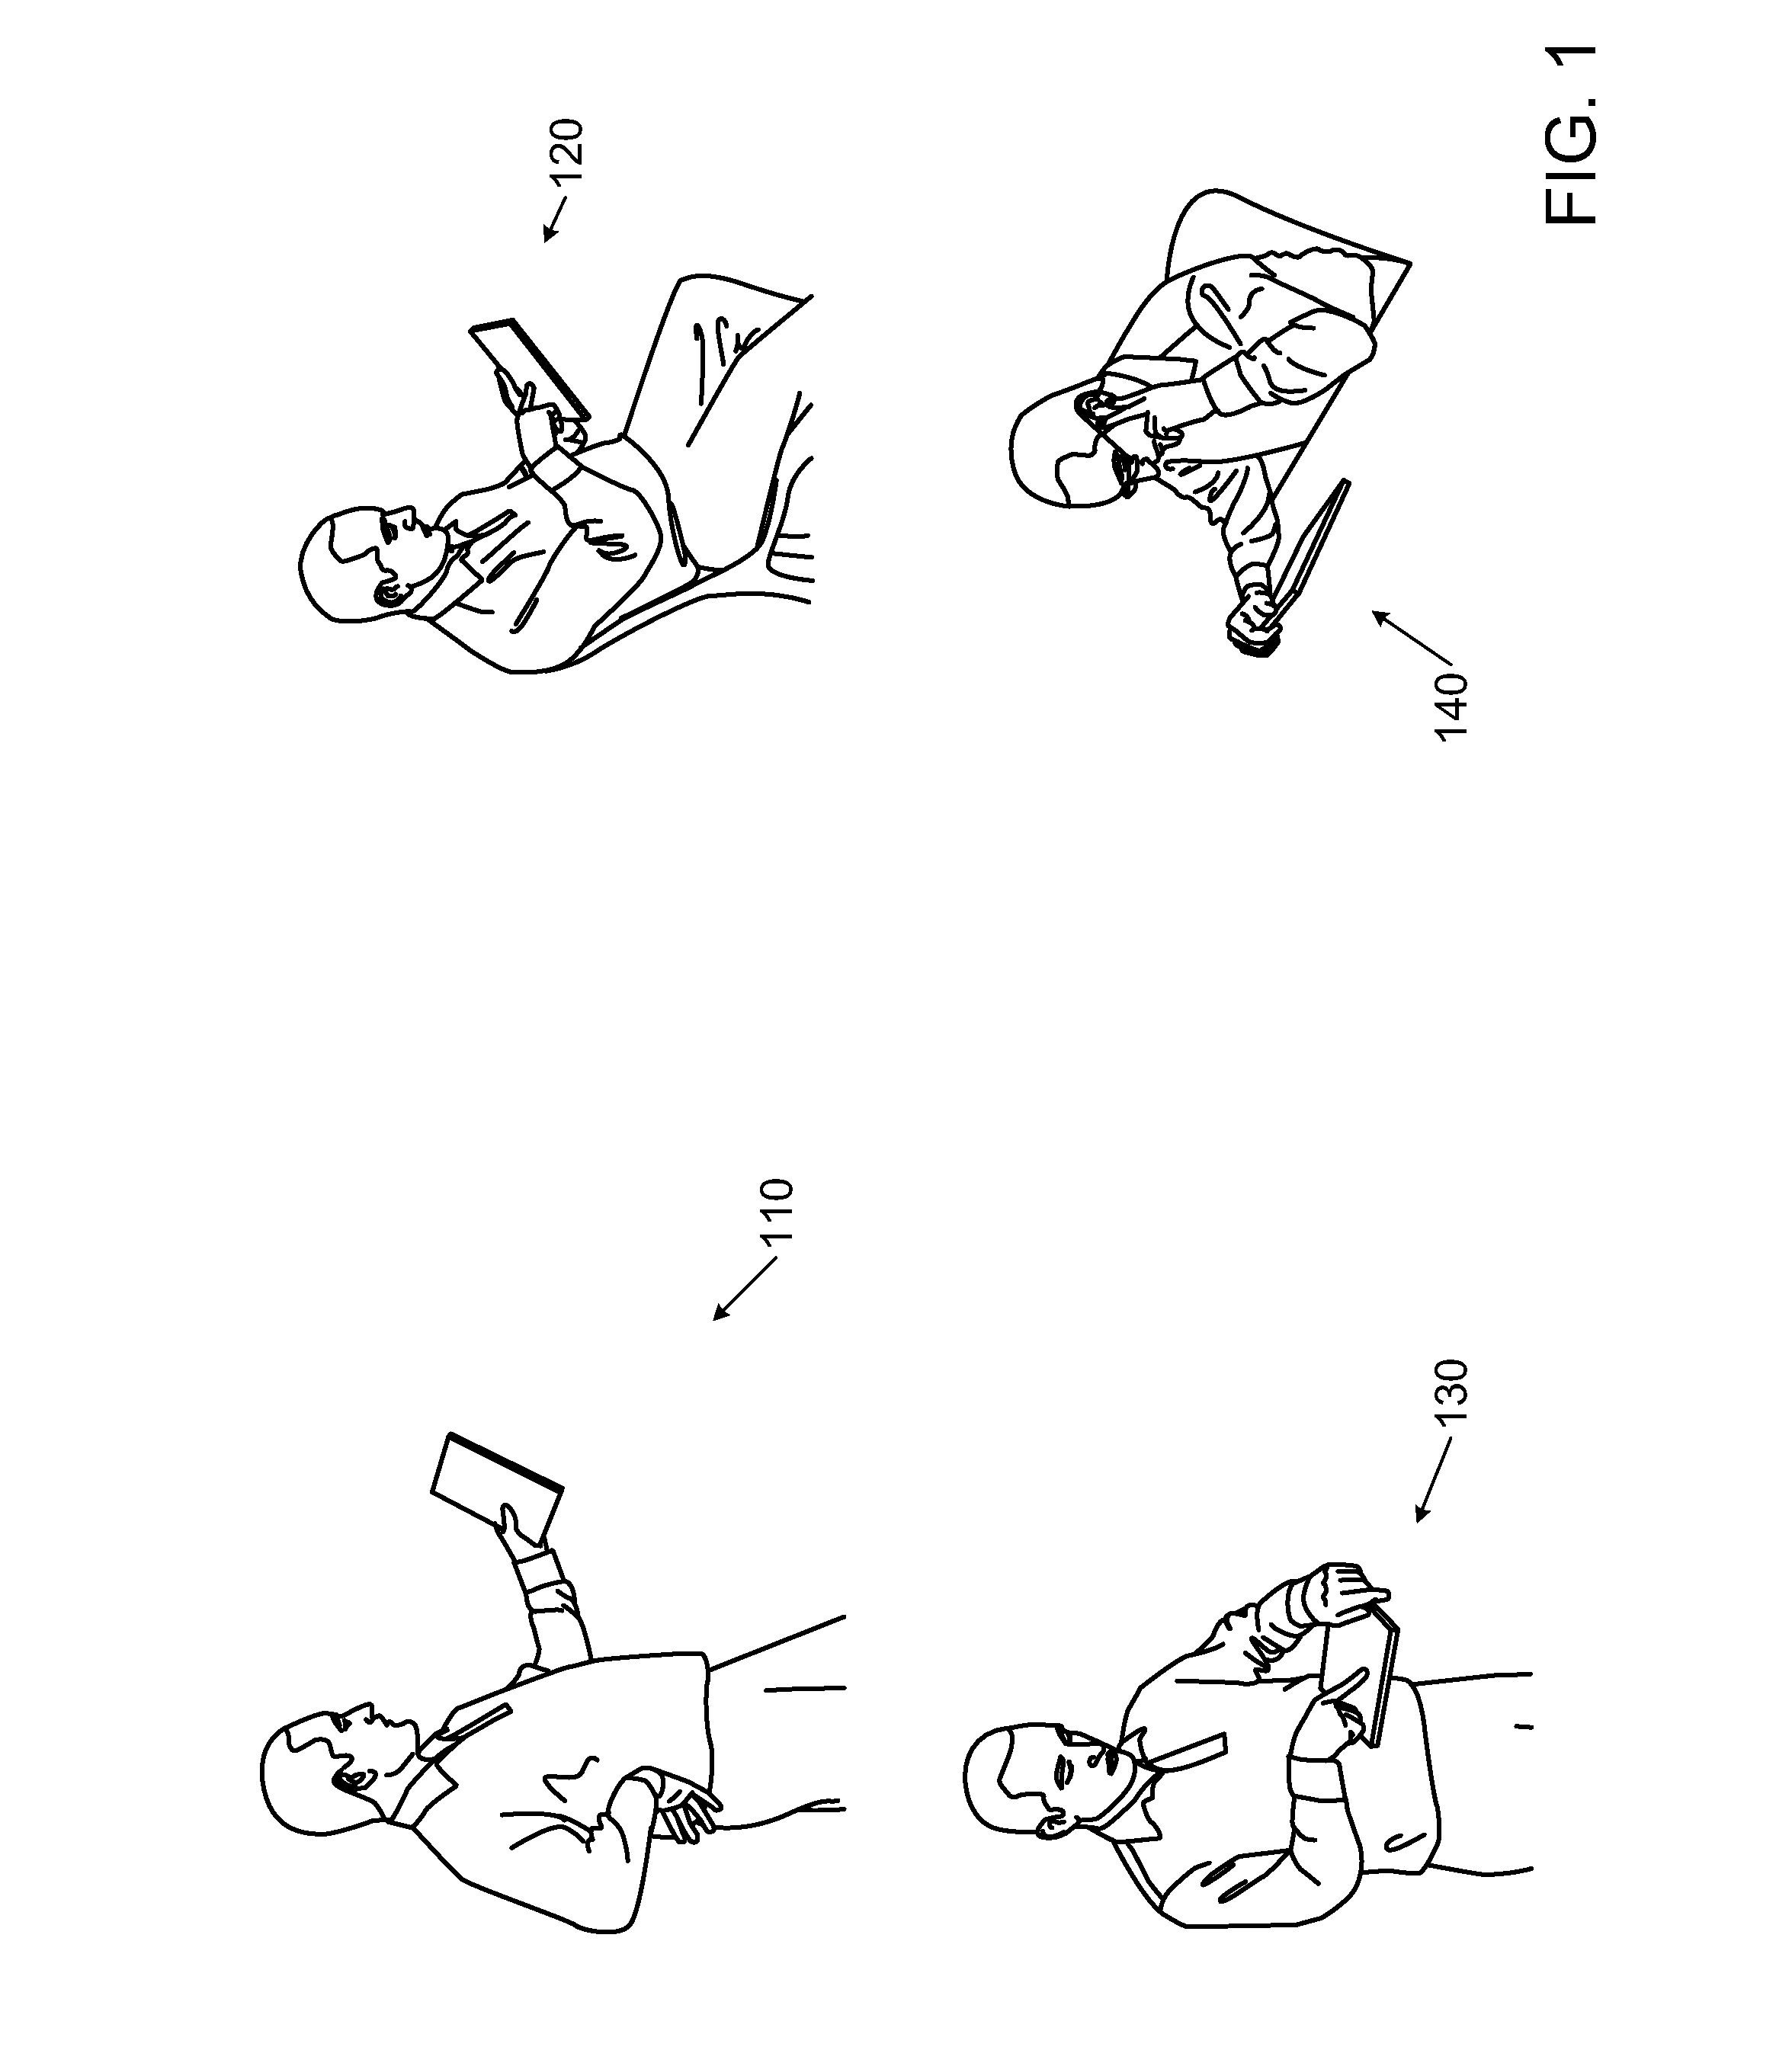 Method and System for Secondary Content Distribution